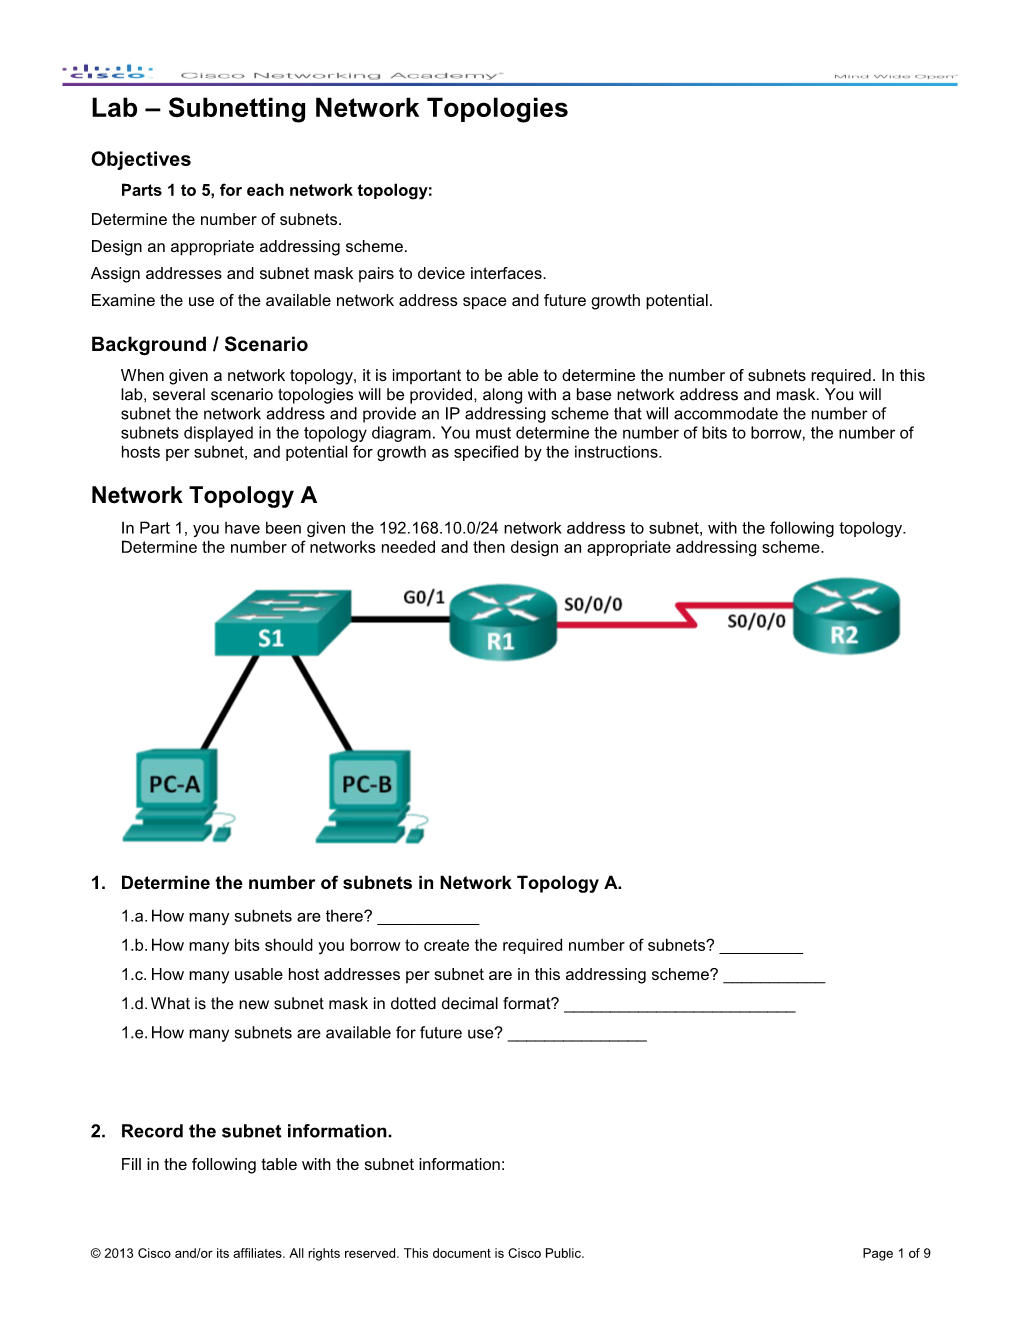 Lab Subnetting Network Topologies